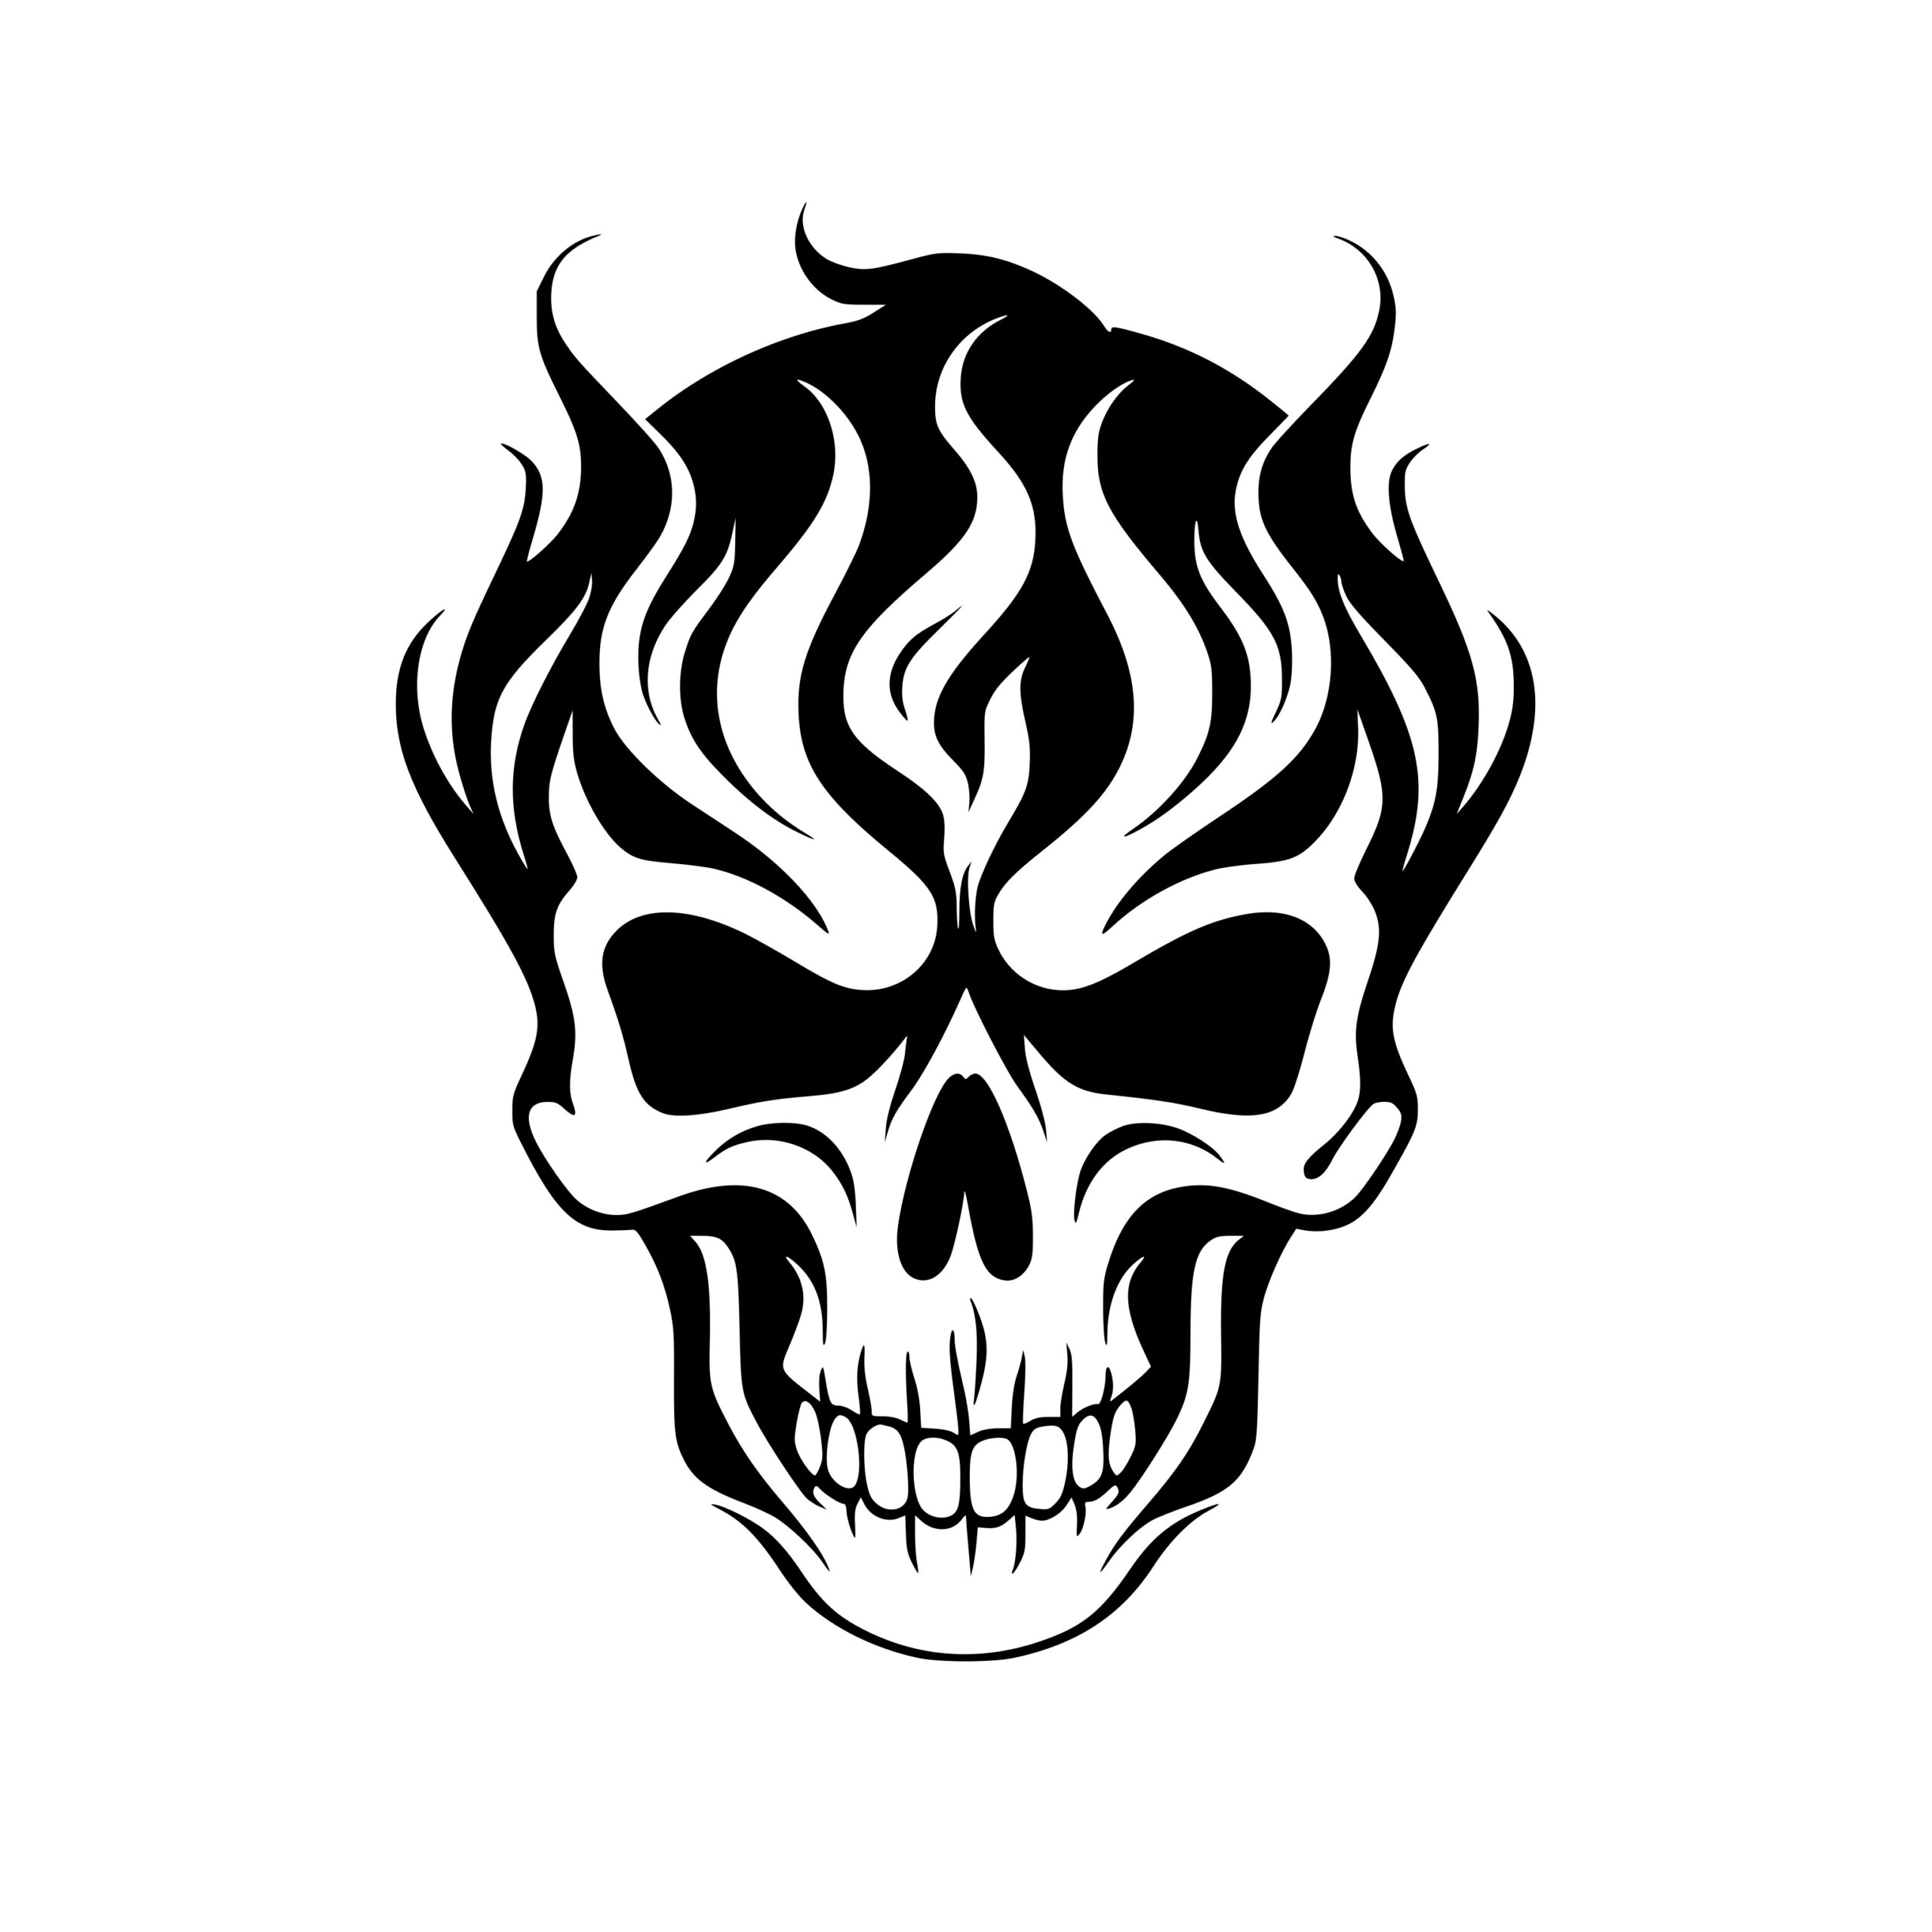 Skull Ablaze: SVG, PNG, DXF Files for Cricut, Silhouette, Laser Machines